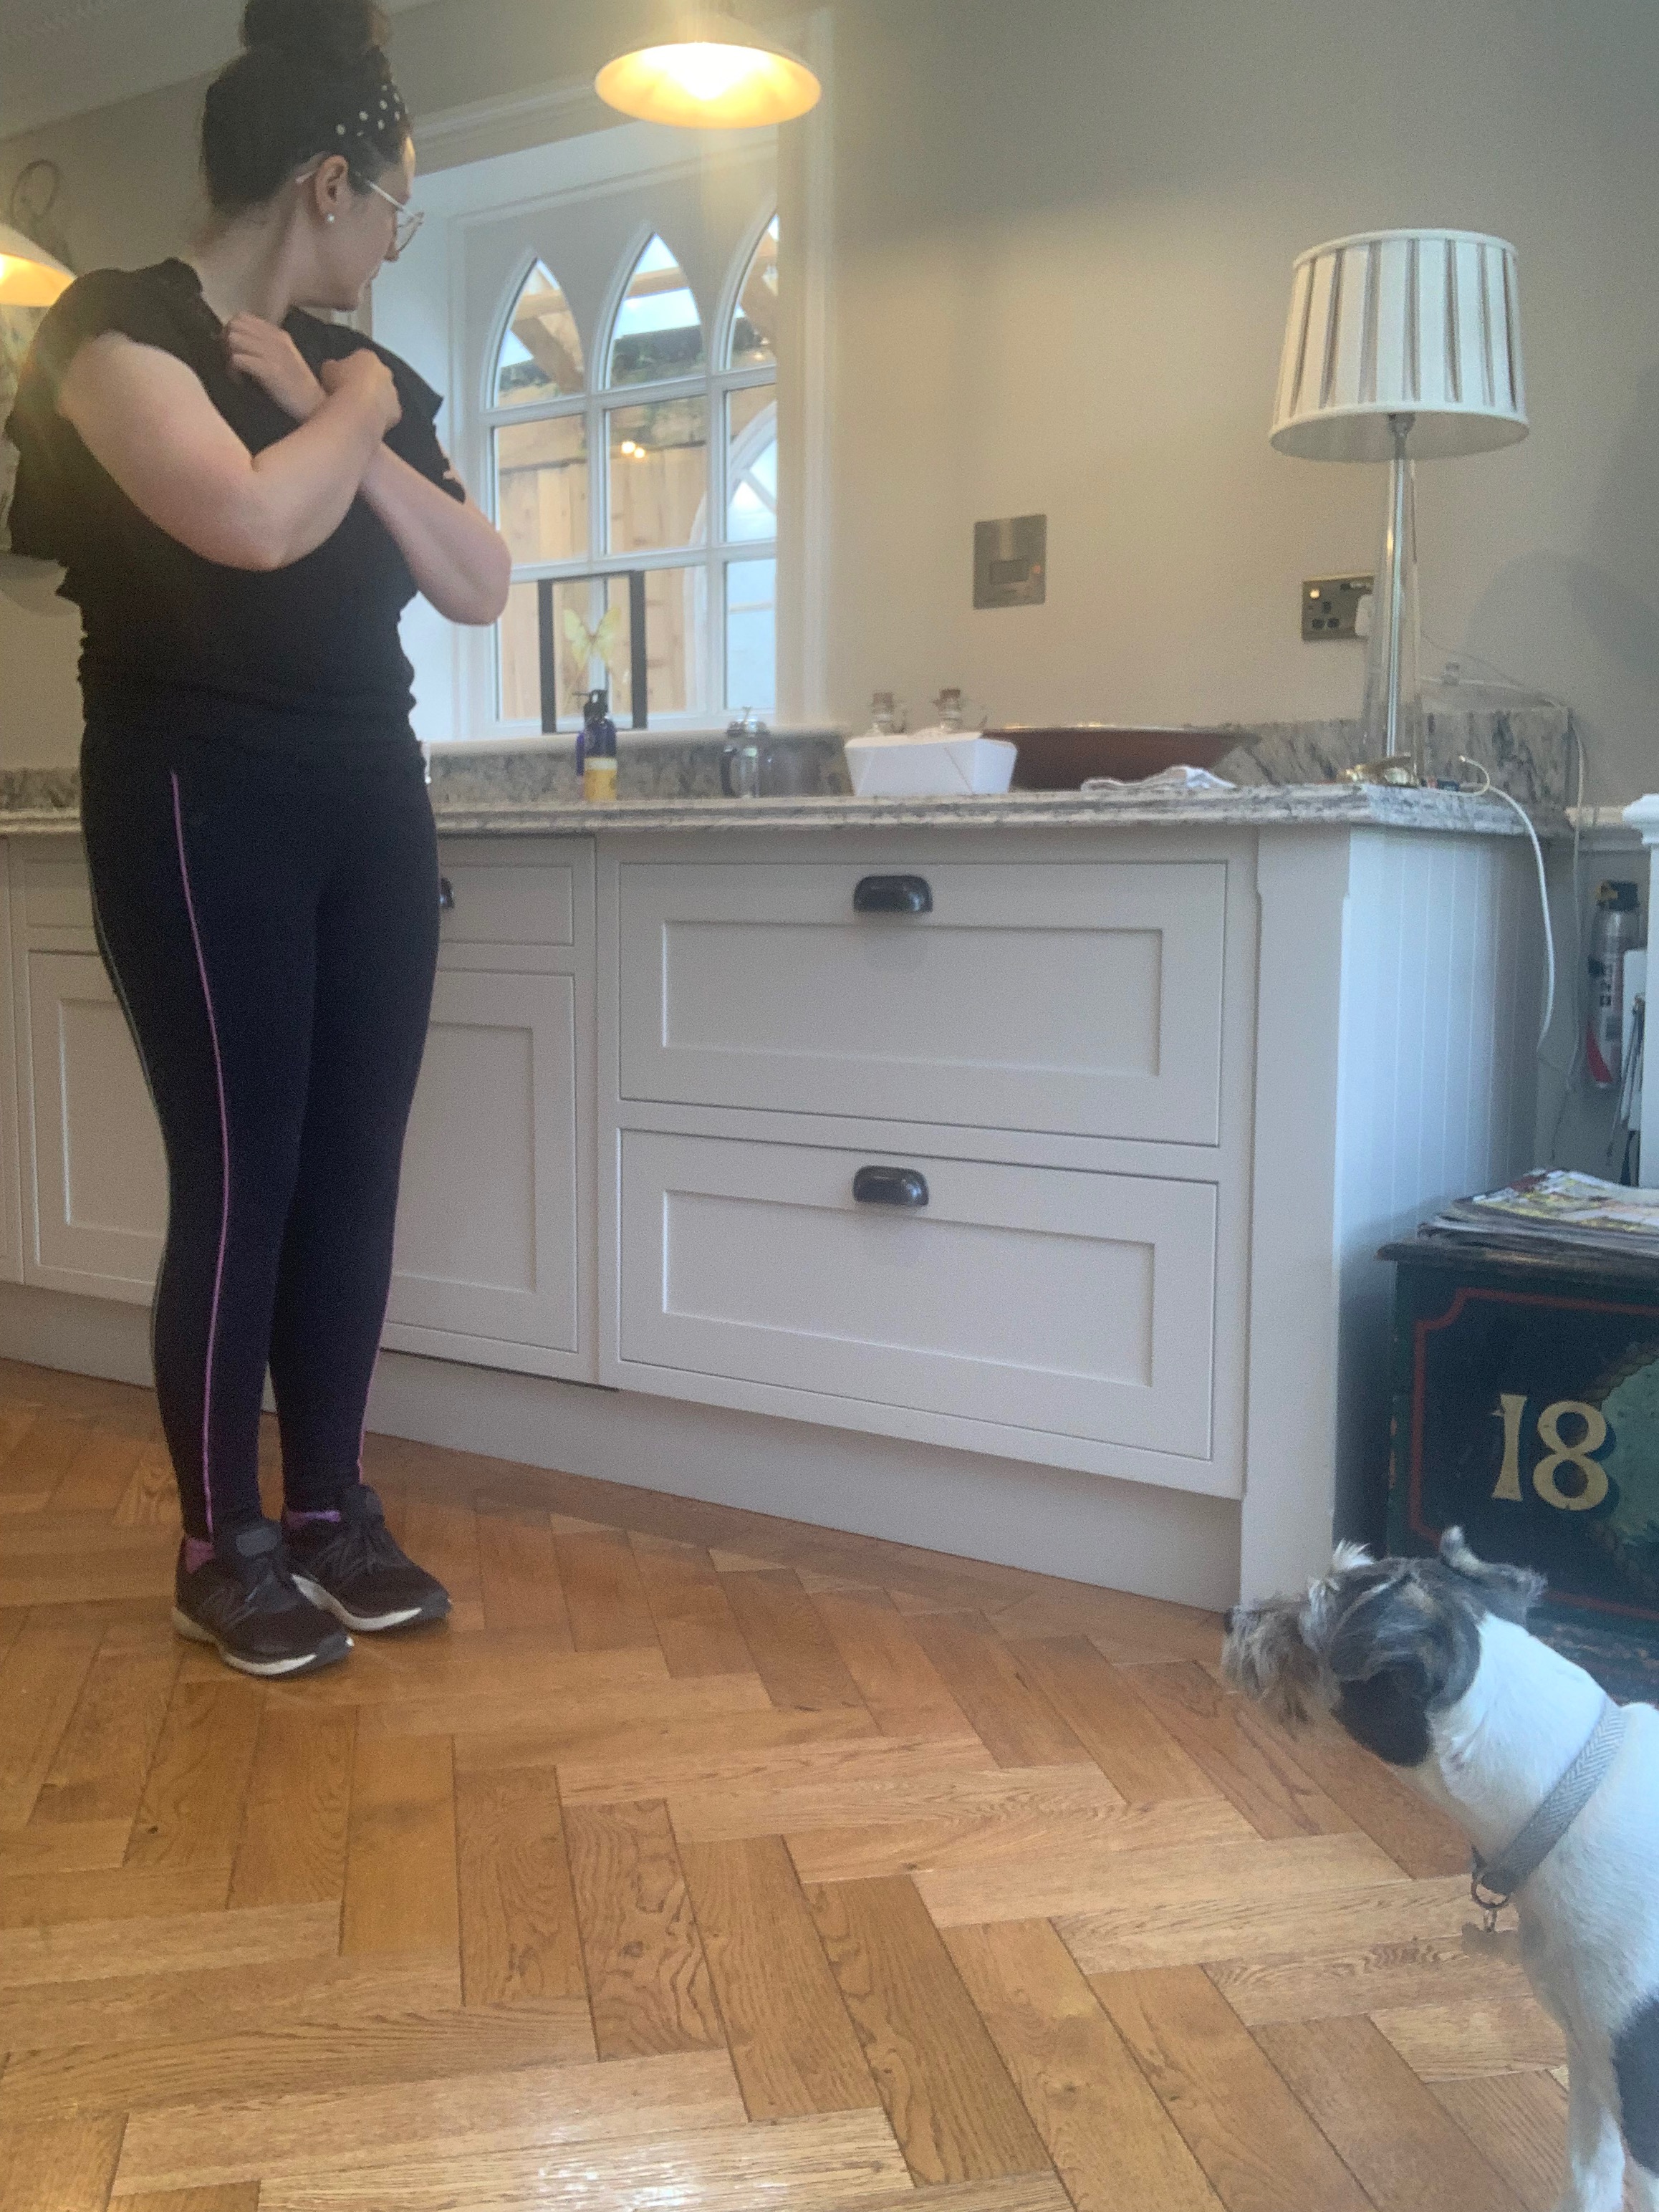 Lisa stands with her arms crossed while a dog looks at her 